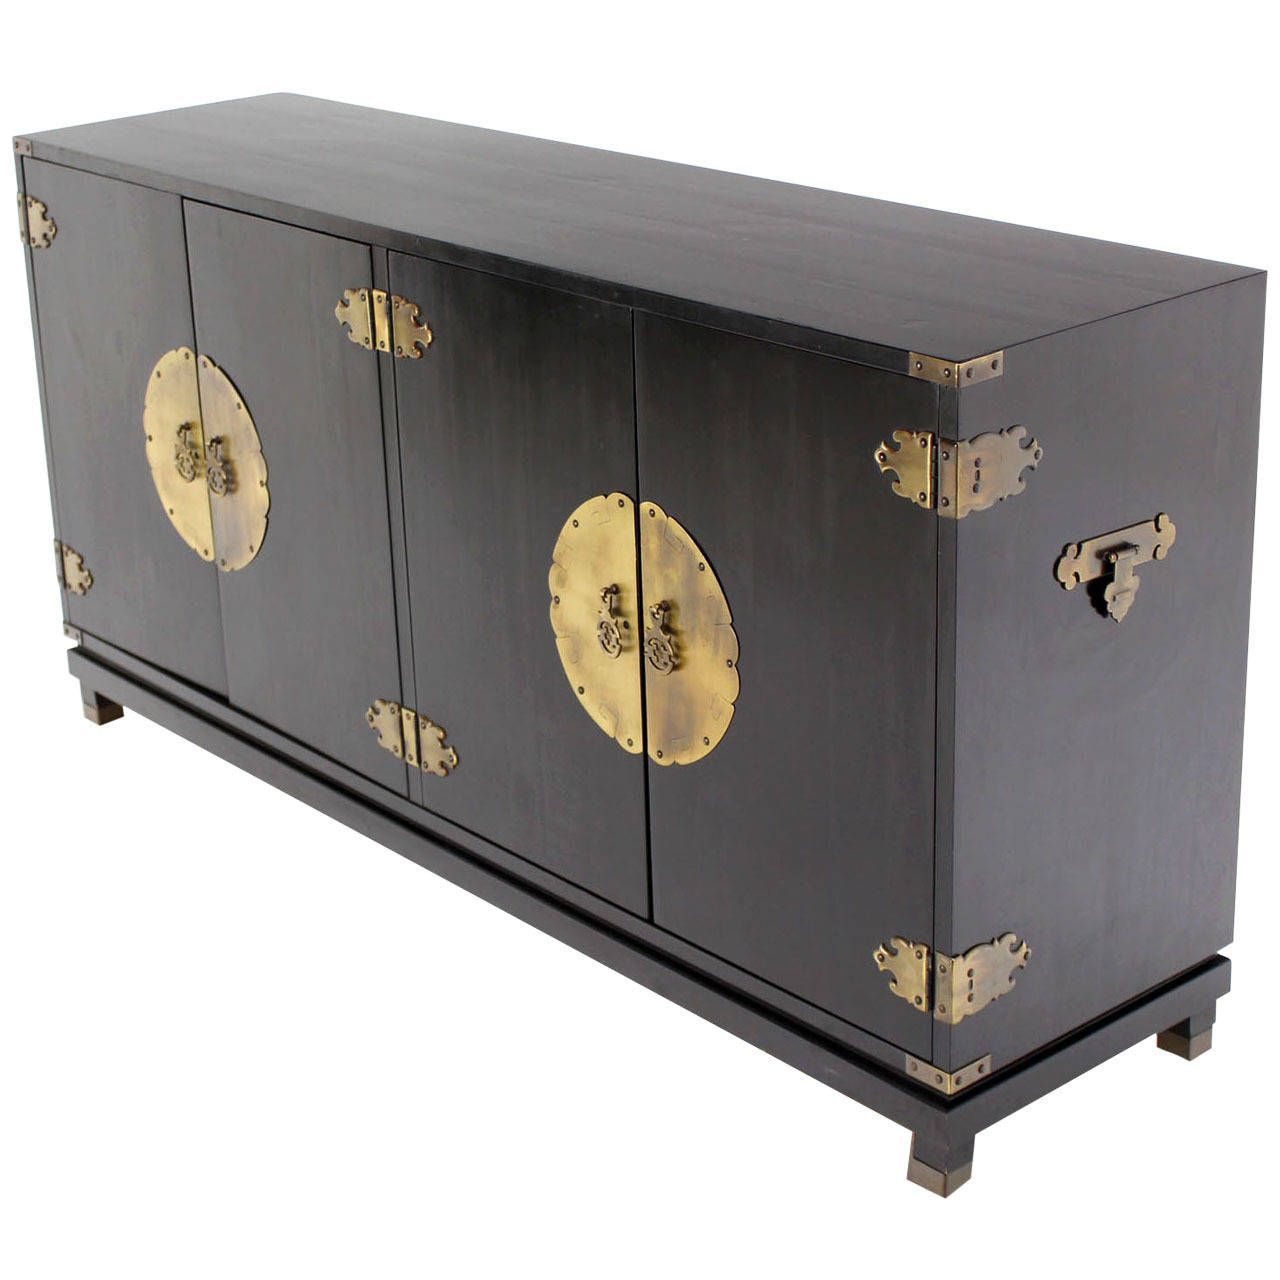 Black Lacquer Oriental Mid Century Modern Sideboard Or Pertaining To Floral Beauty Credenzas (View 13 of 30)